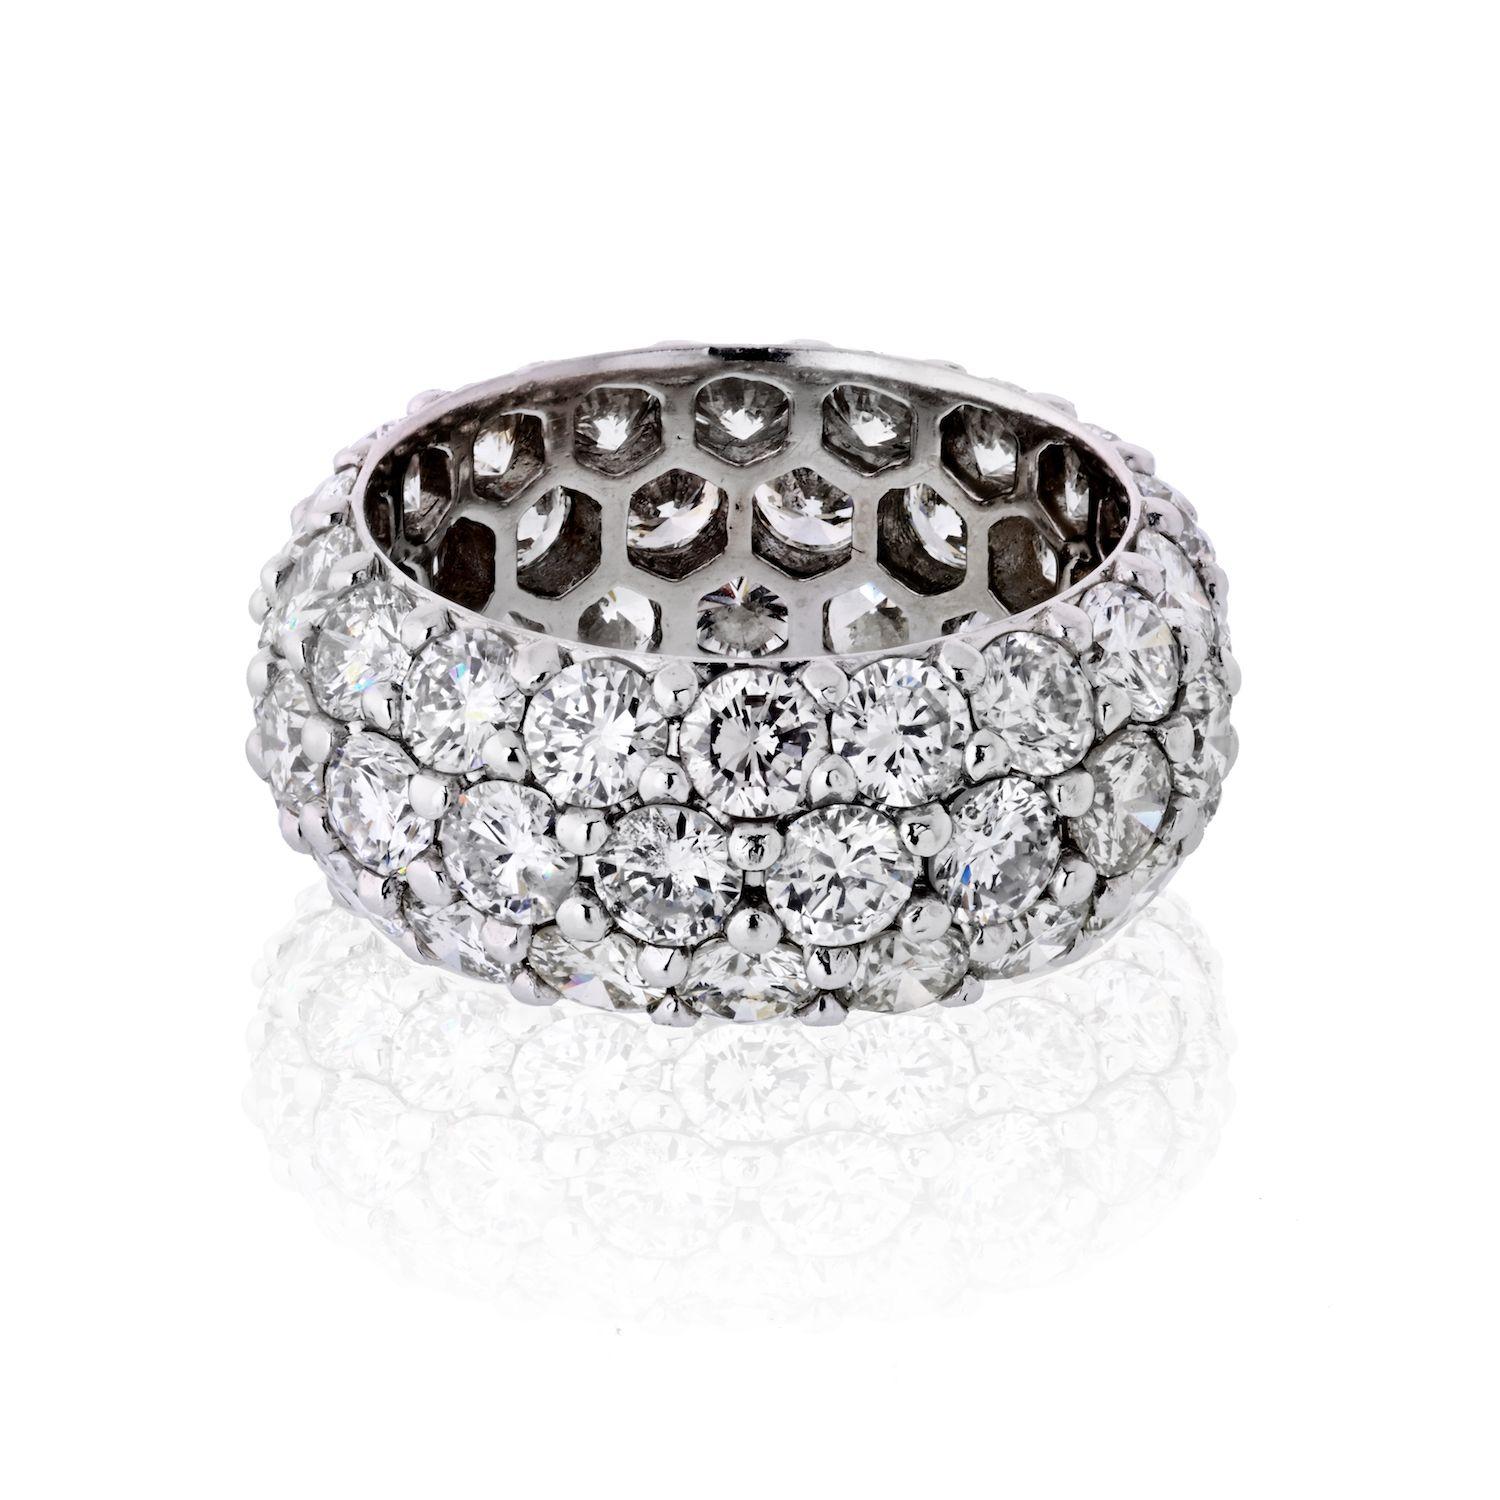 Mounted with 53 round brilliant cut diamonds this is one exciting eternity band! It is an impressive 0.3 inches wide and boasts 9 carat (approx.) in diamond weight. 
Crafted in platinum this ring has a slightly domed profile for comfort and smooth